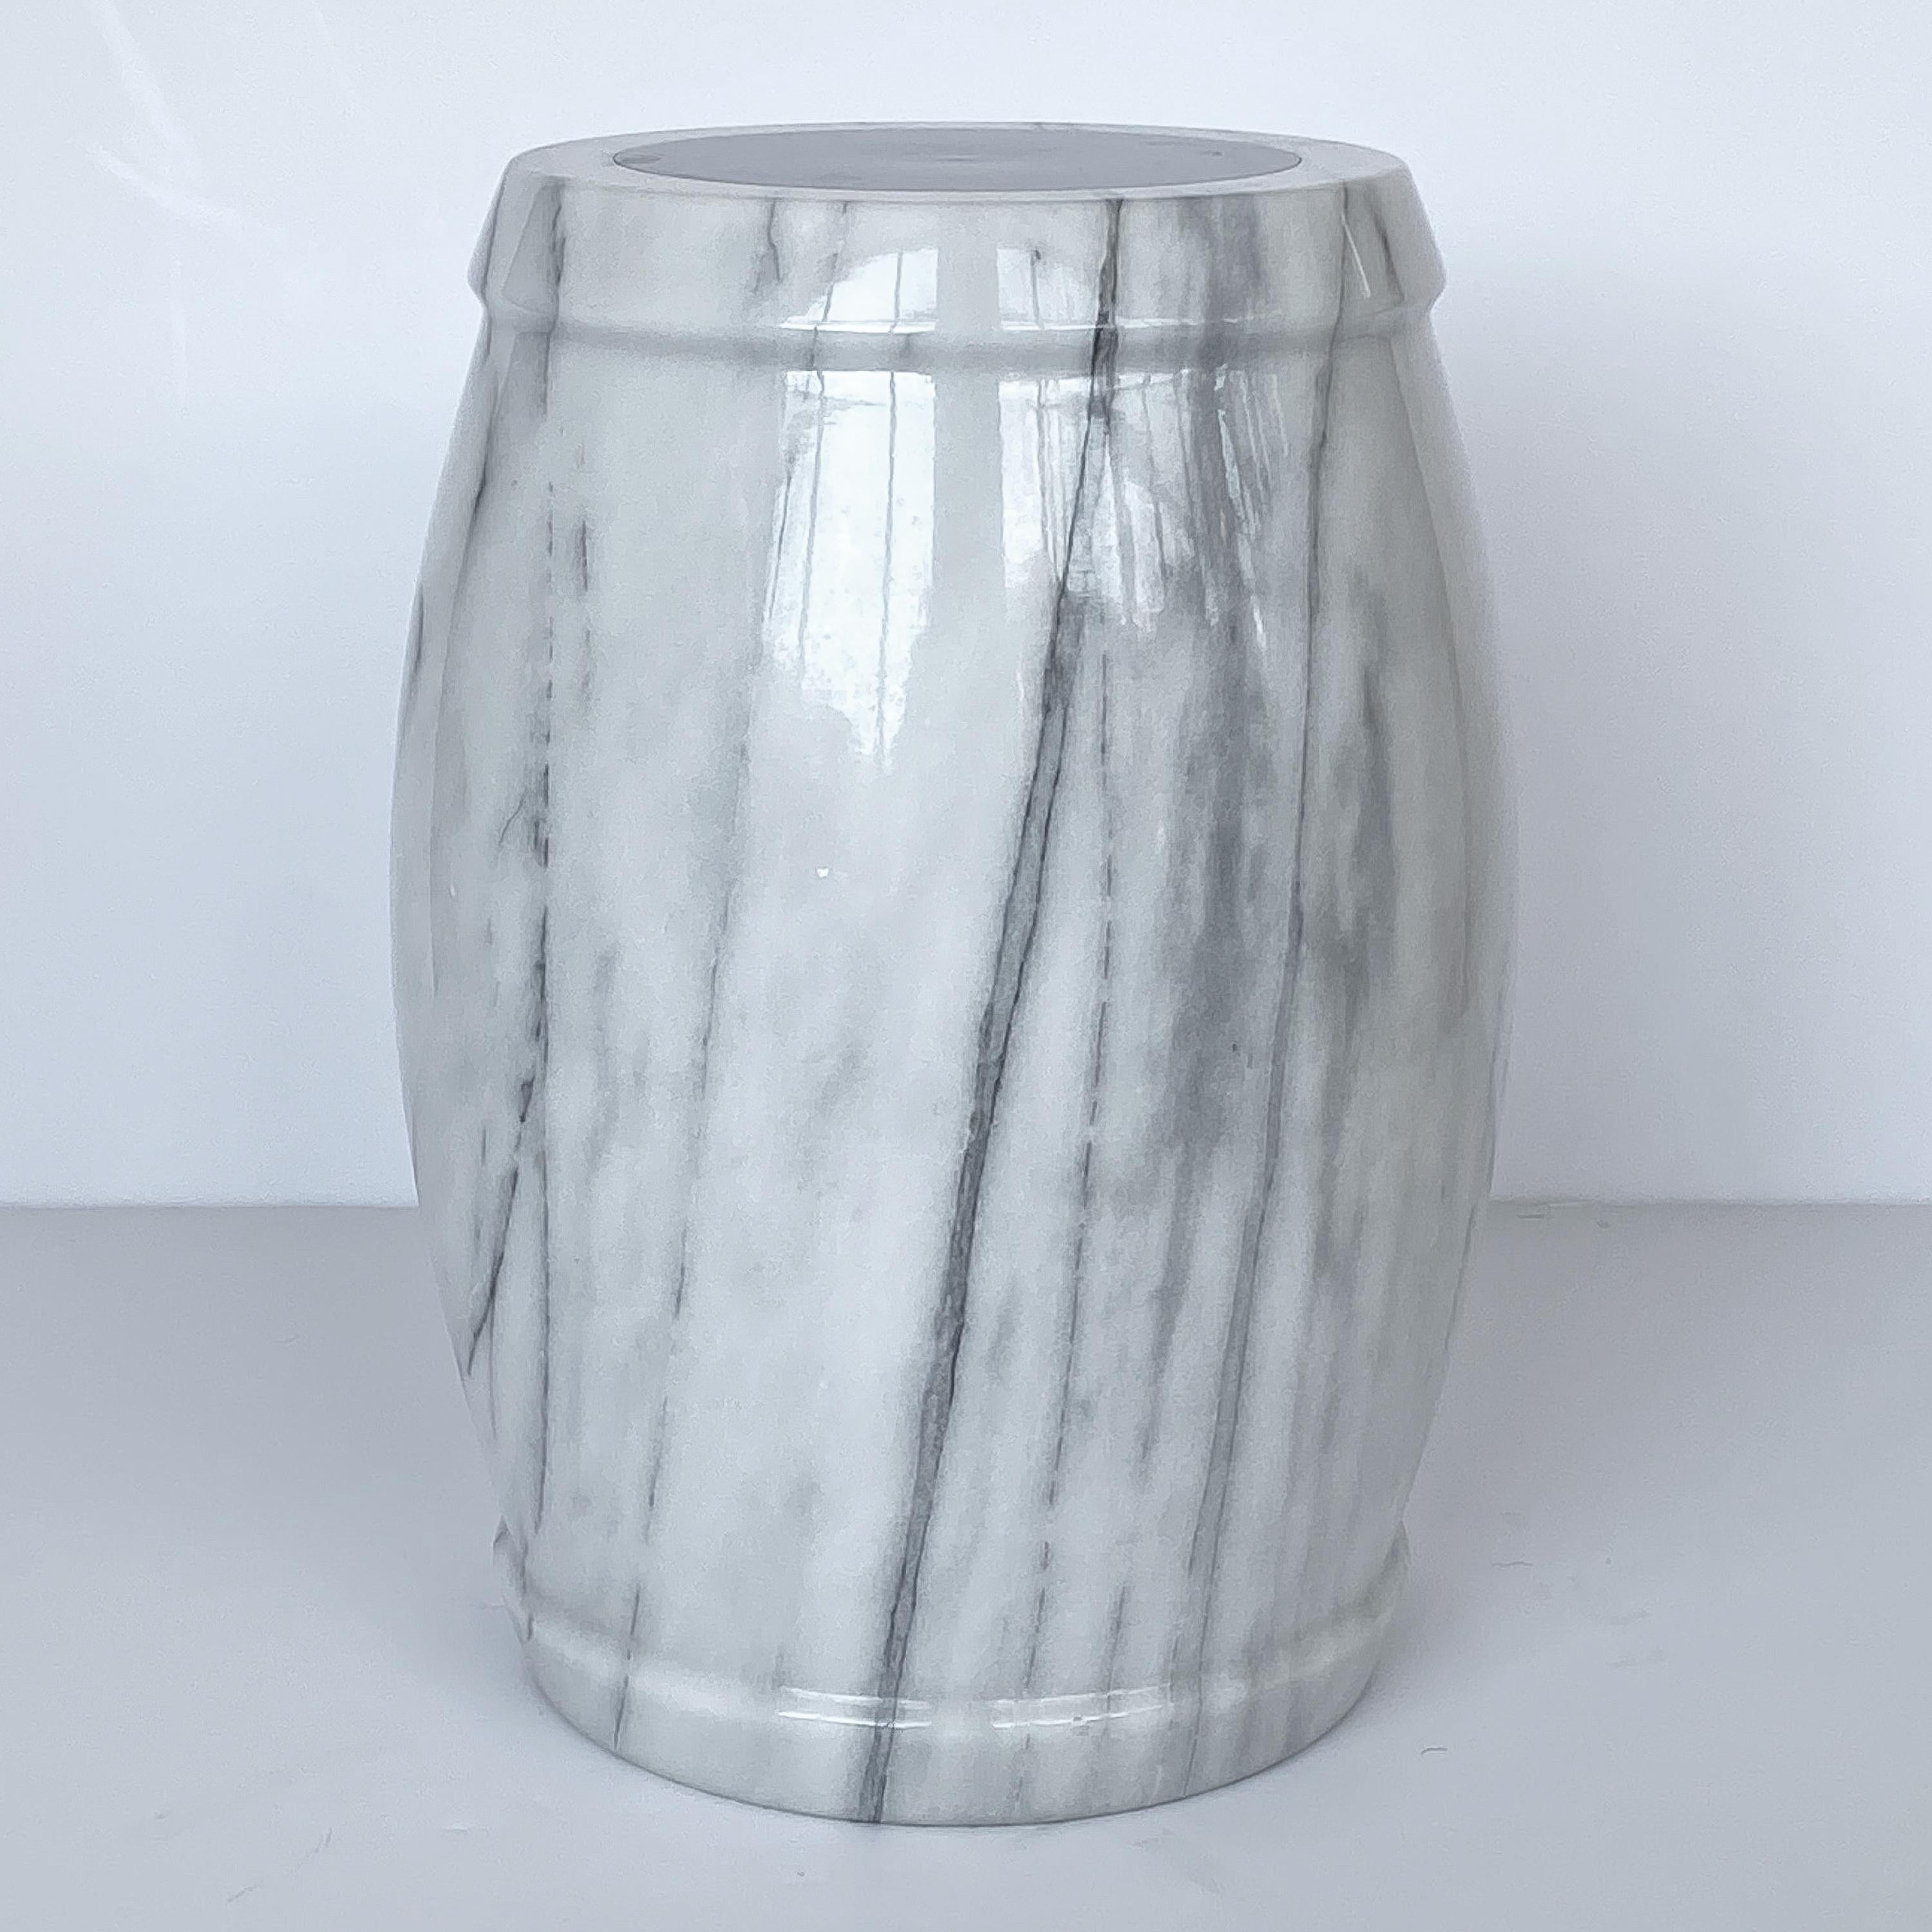 A unique marble stool or side table. White marble with gray veining. Top is inset with a round 7